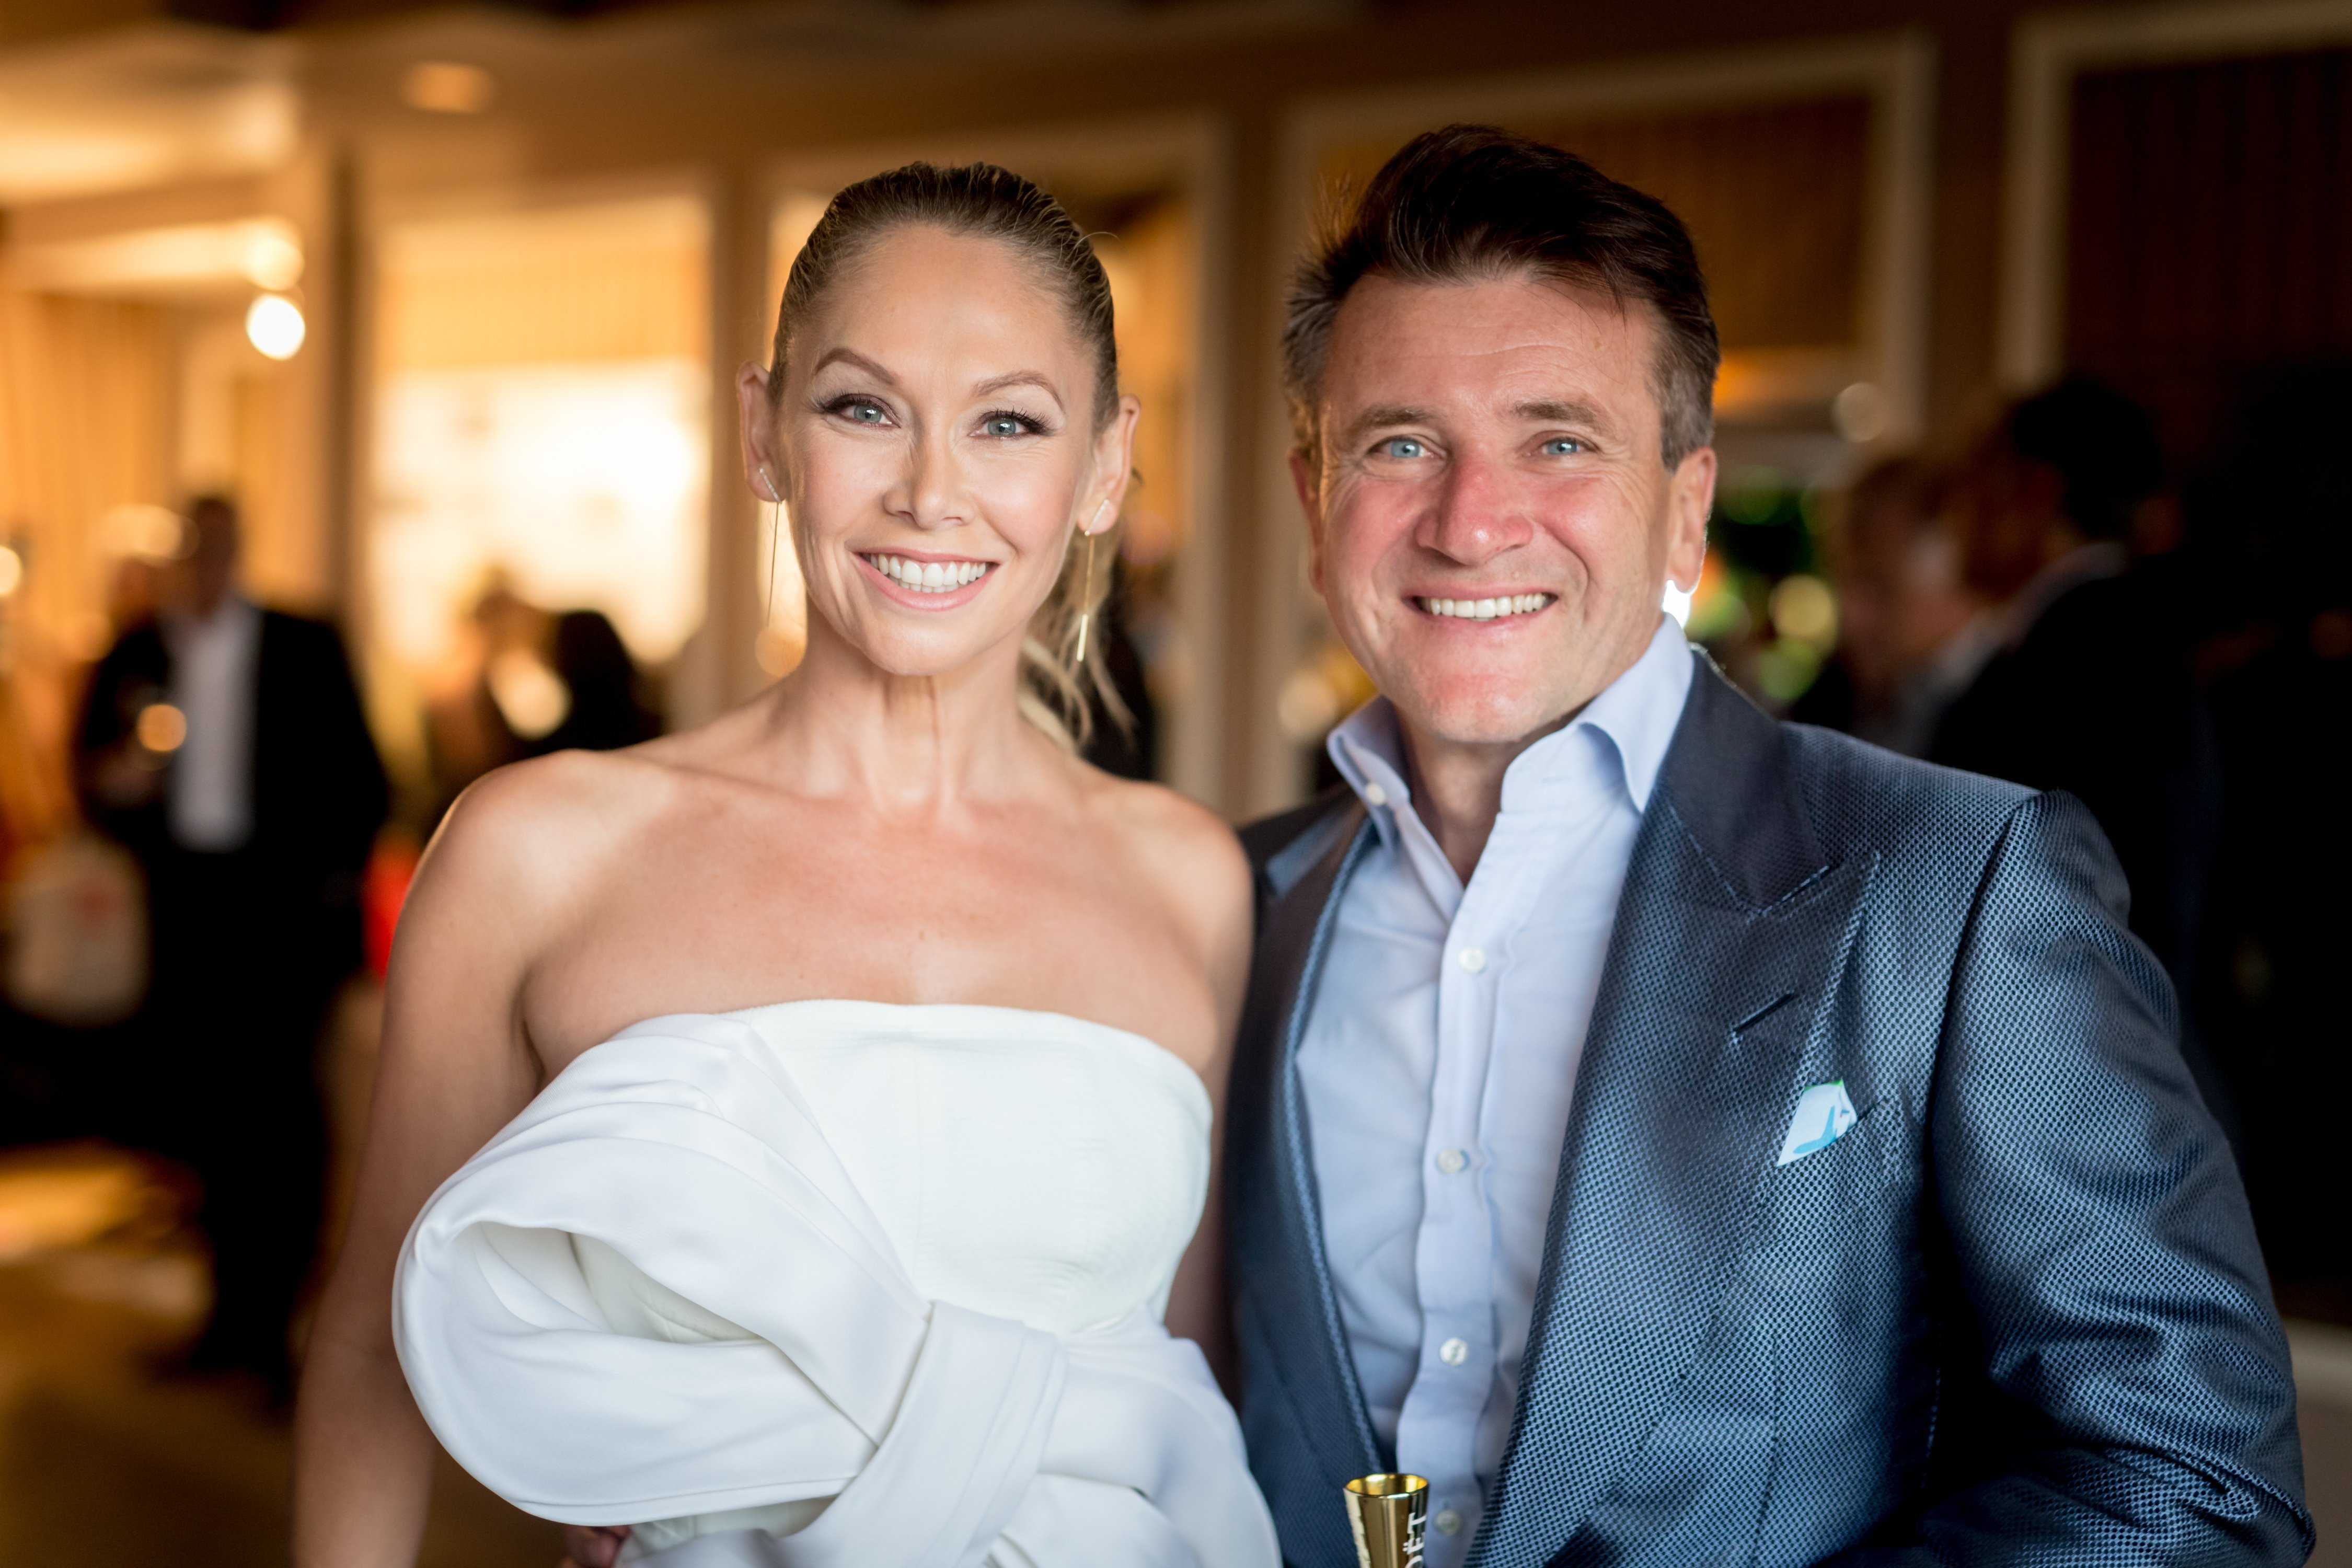 Kym Herjavec and Robert Herjavec attend the Television Industry Advocacy Awards in West Hollywood, California on September 16, 2016 | Photo: Getty Images